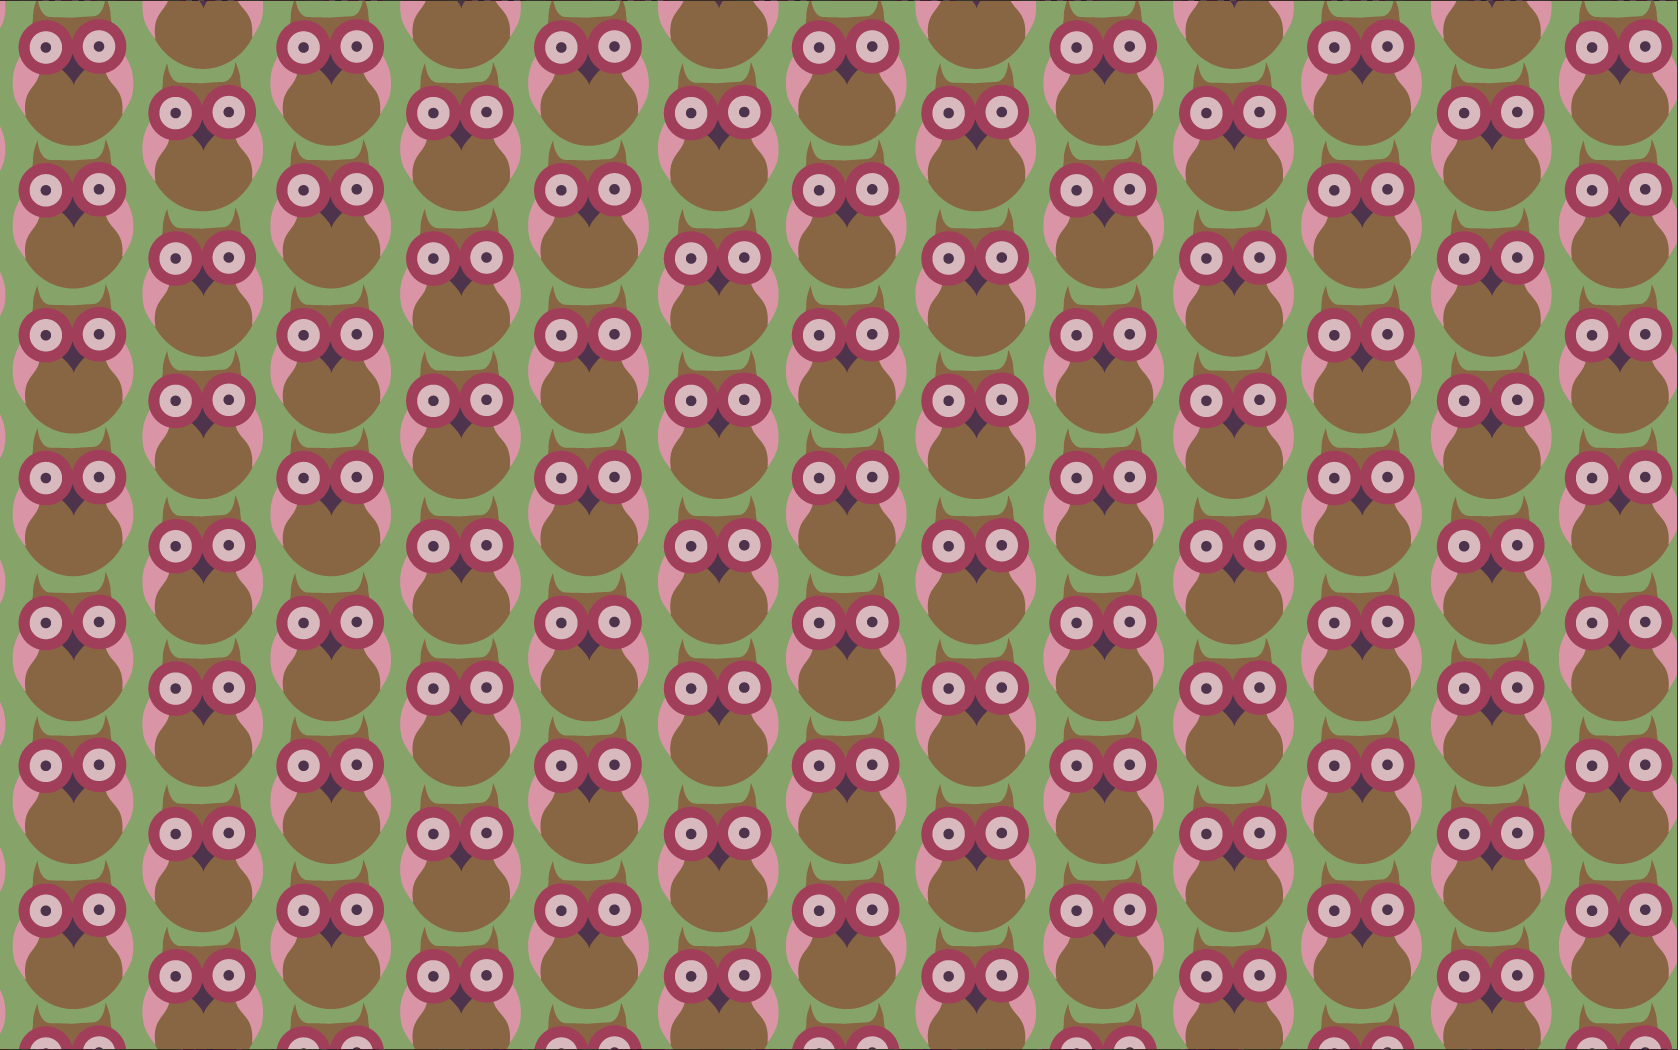 My Textile and Pattern Designs | kathrineborup | Page 2